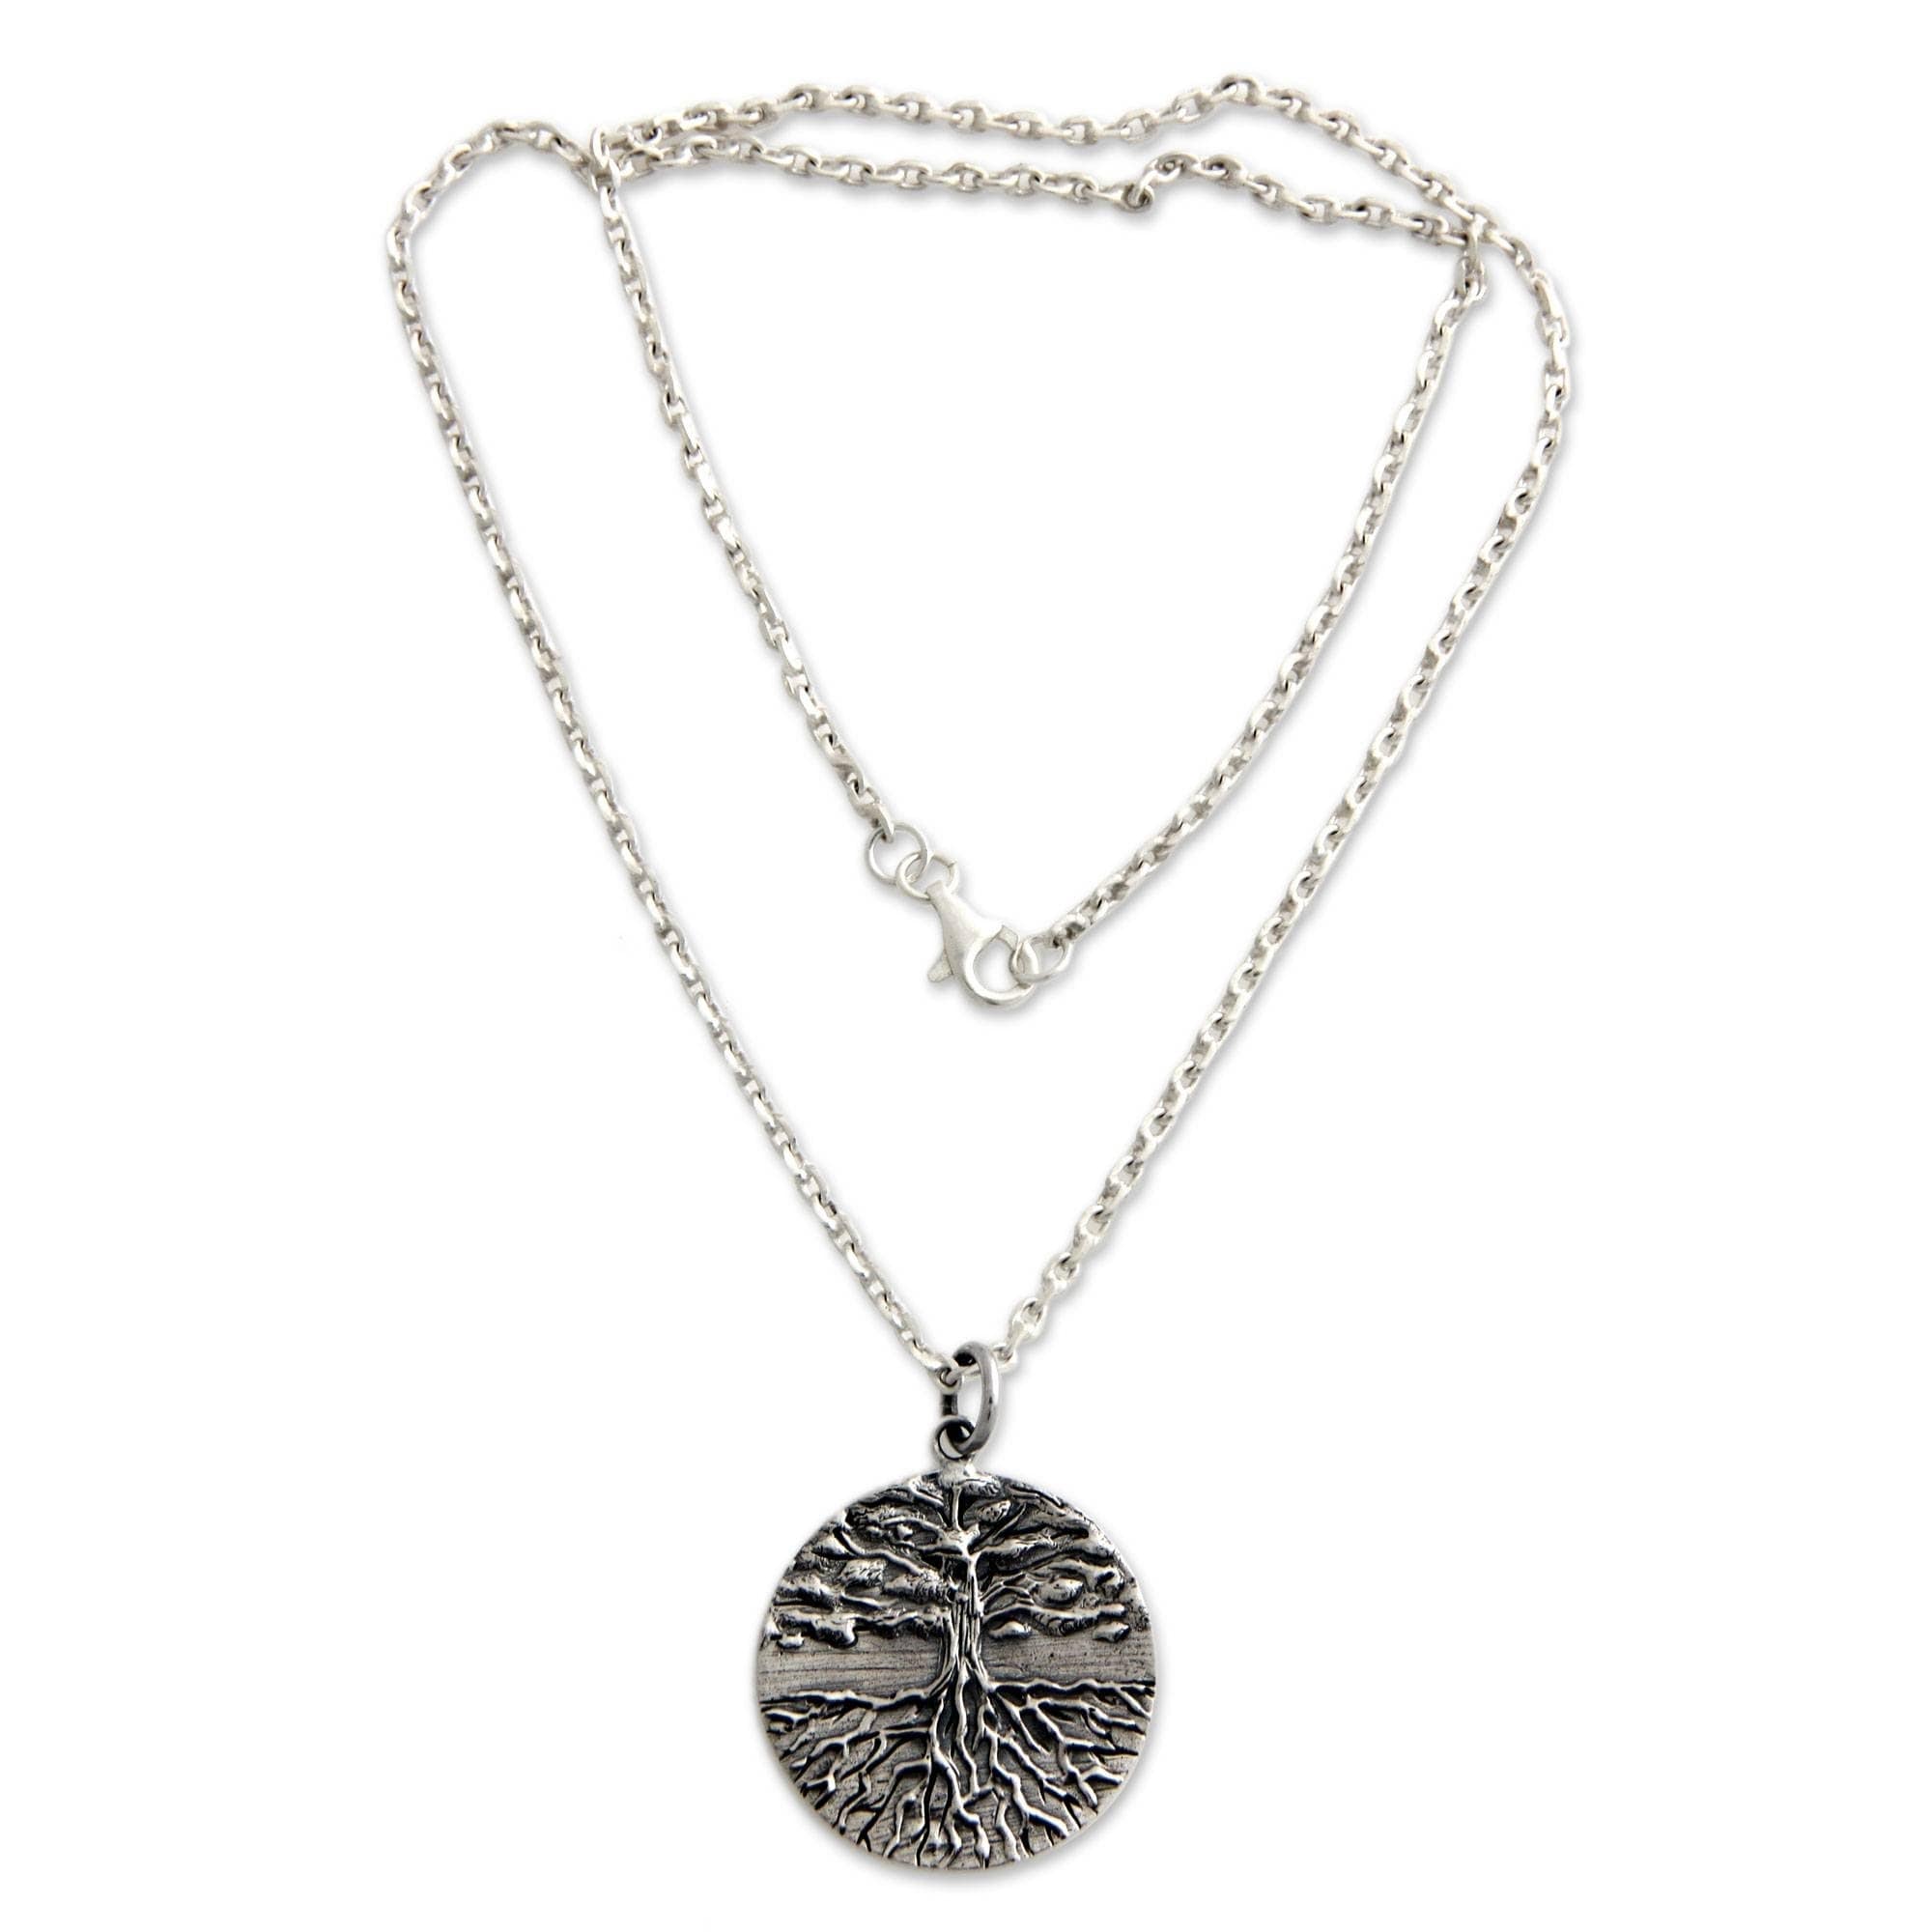 Handmade Men's Sterling Silver Necklace Tree of Life (Indonesia) - 7'6